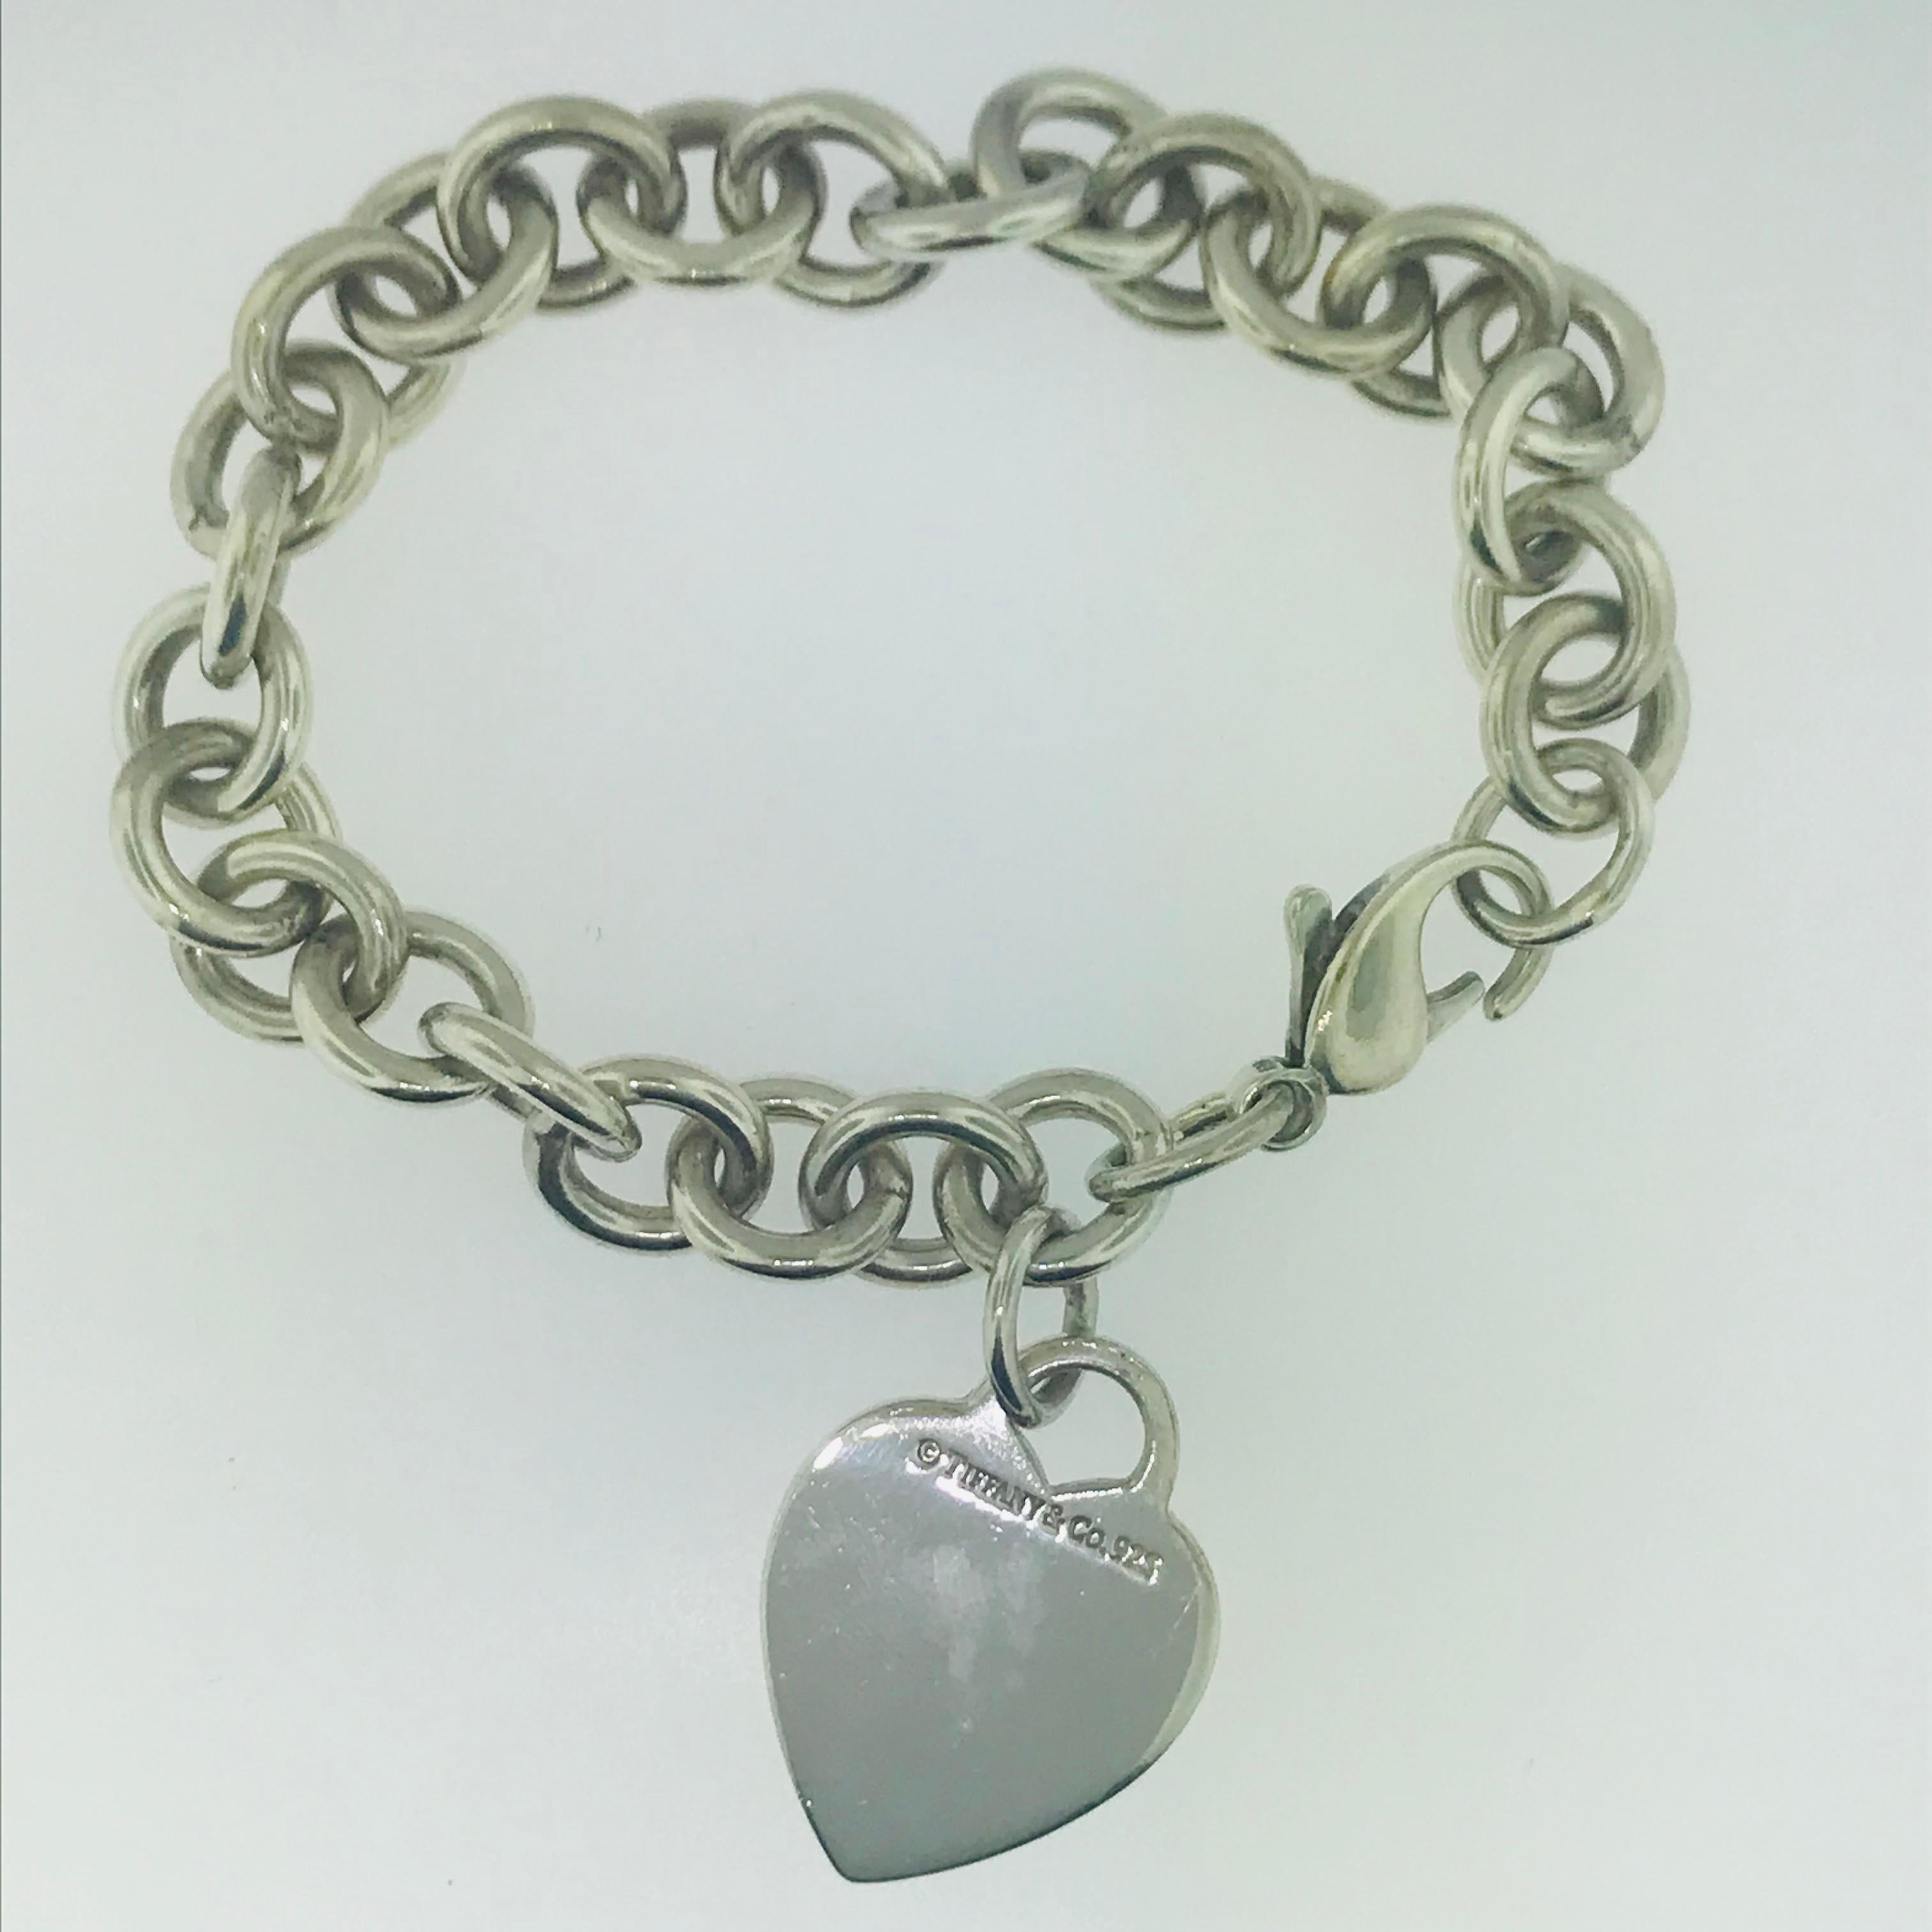 A true classic. This Tiffany & Co.sterling silver chain bracelet is a truly classy and timeless piece to add to any fine jewelry collection. This Tiffany & Co. charm bracelet has large links that are high quality and high polish. A great addition to